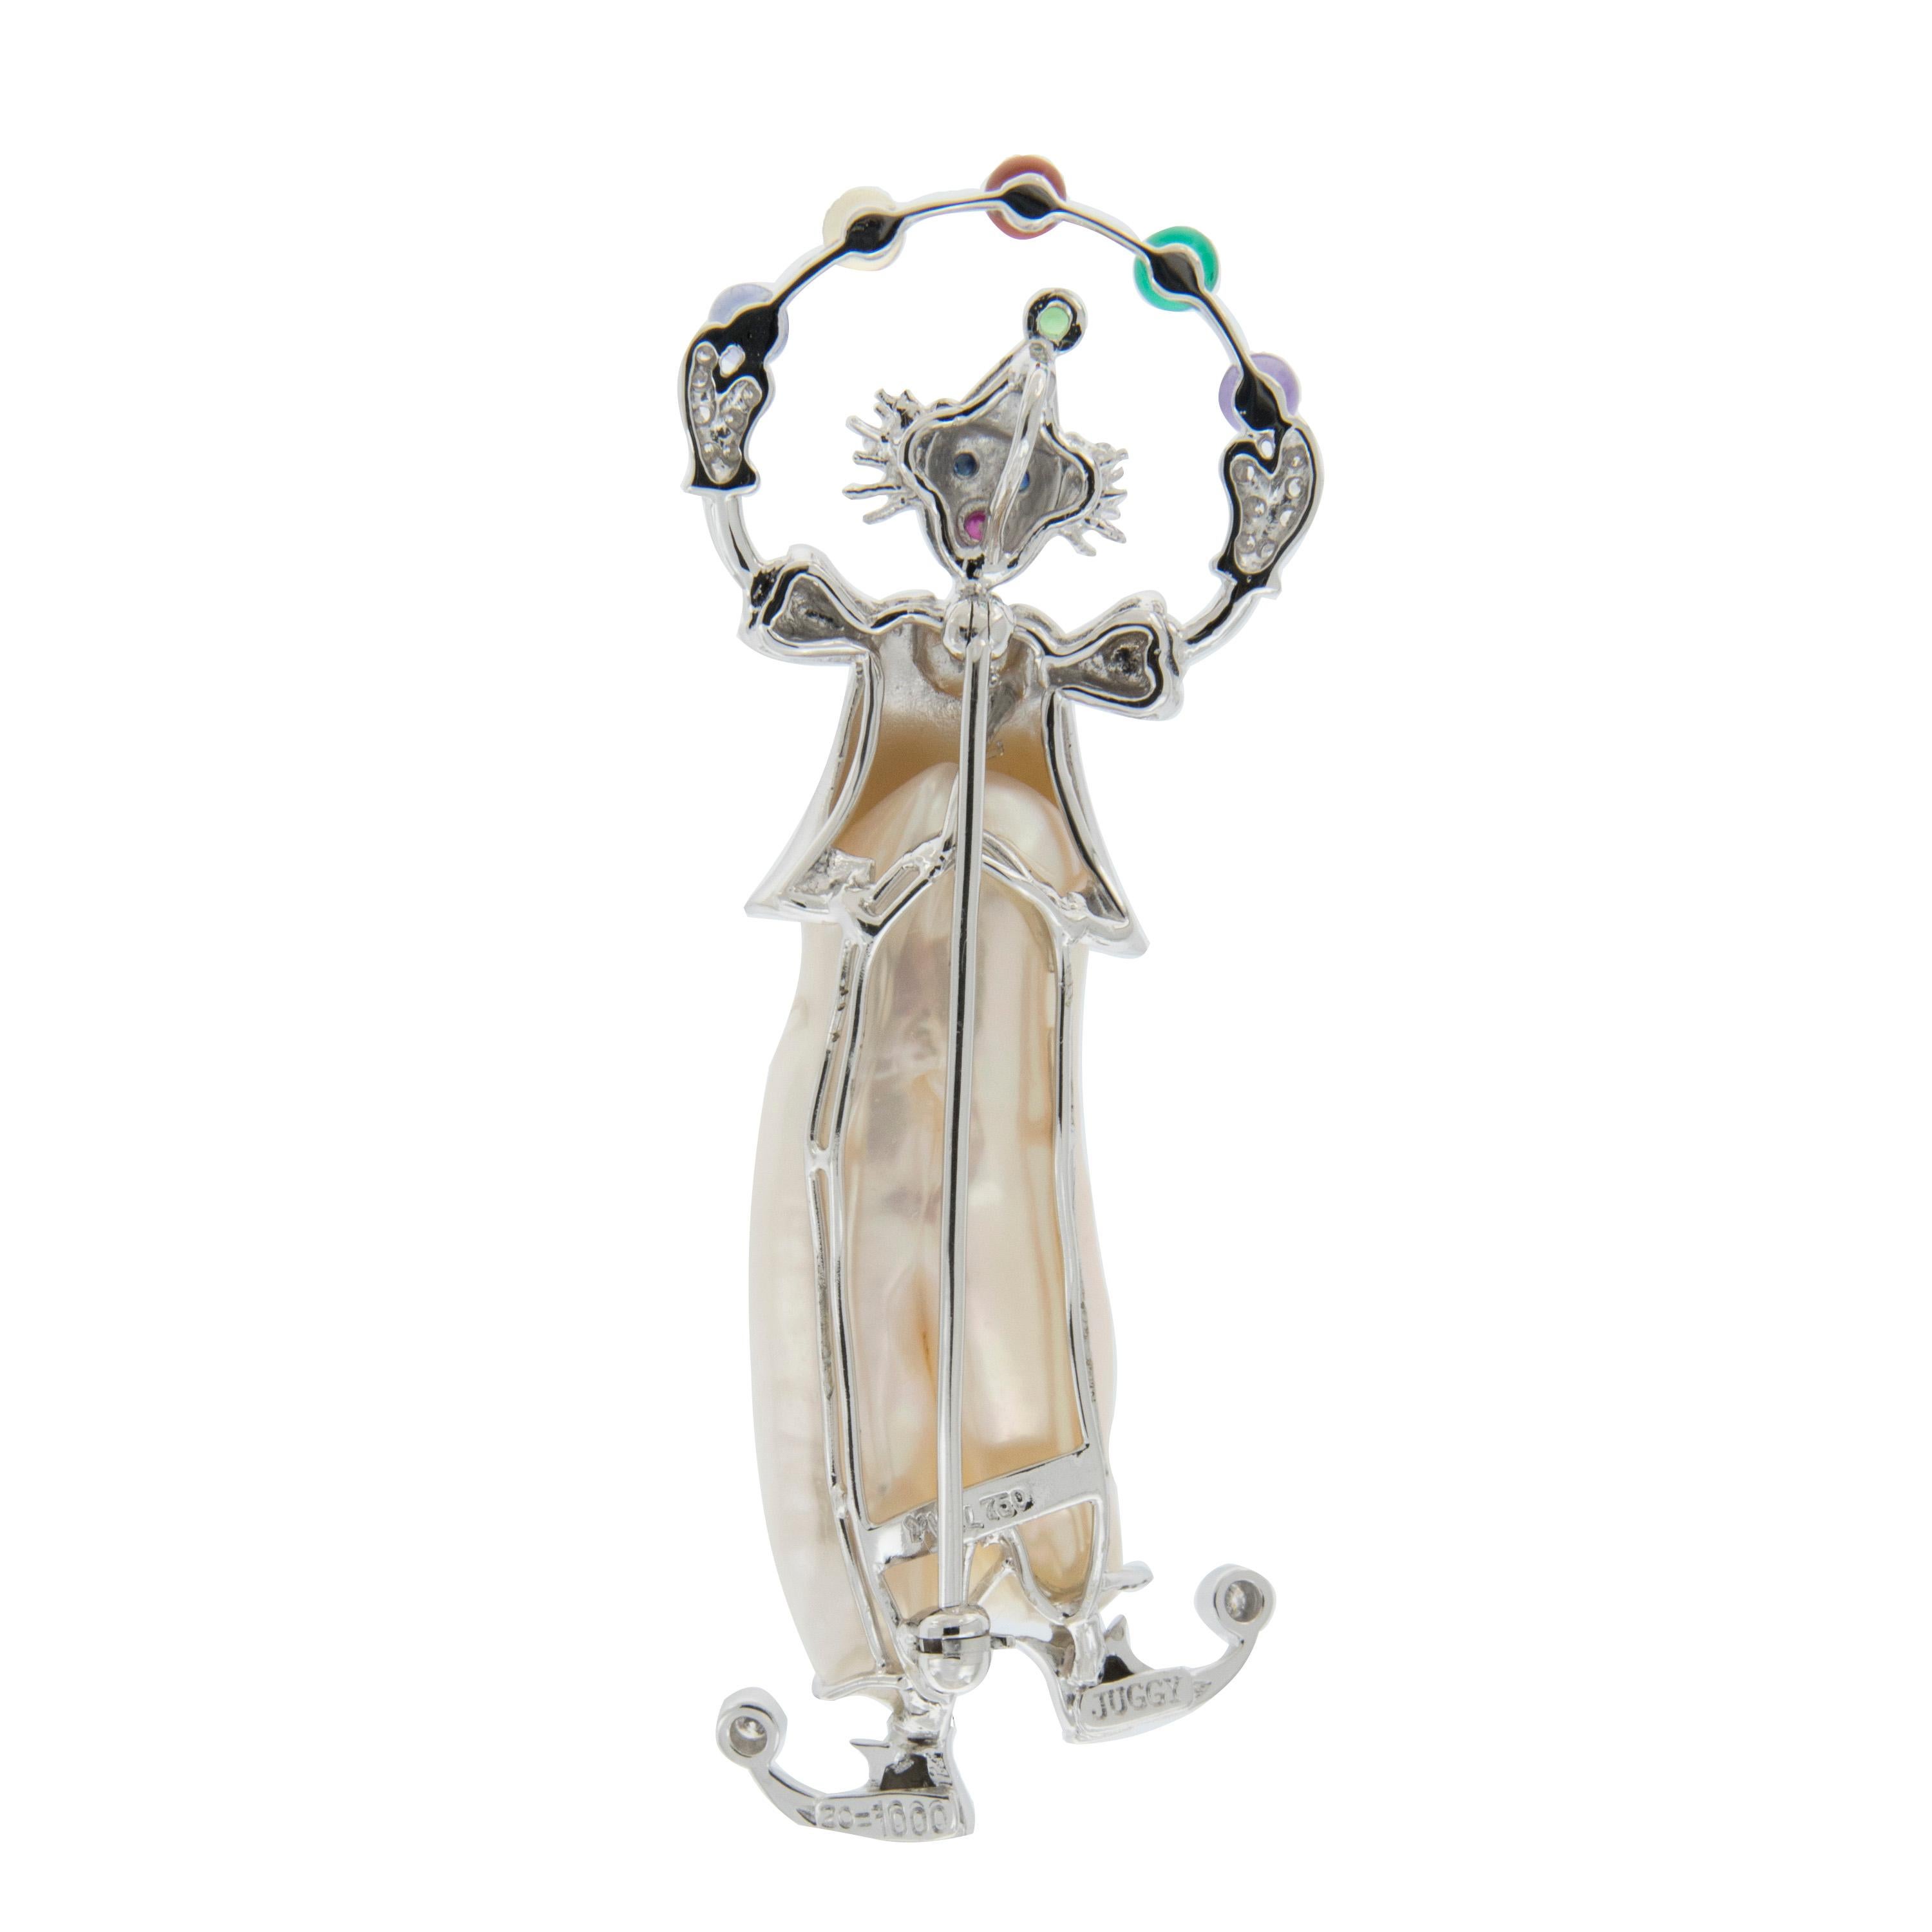 This charming pin is beautifully crafted in 18k white gold. the clown is wearing a freshwater pearl suit and diamonds on the toes, hands and suit. Accented with multi-colored gemstones. Marked YVEL. Weighs 16.4 grams.

Diamonds 1.0 cttw